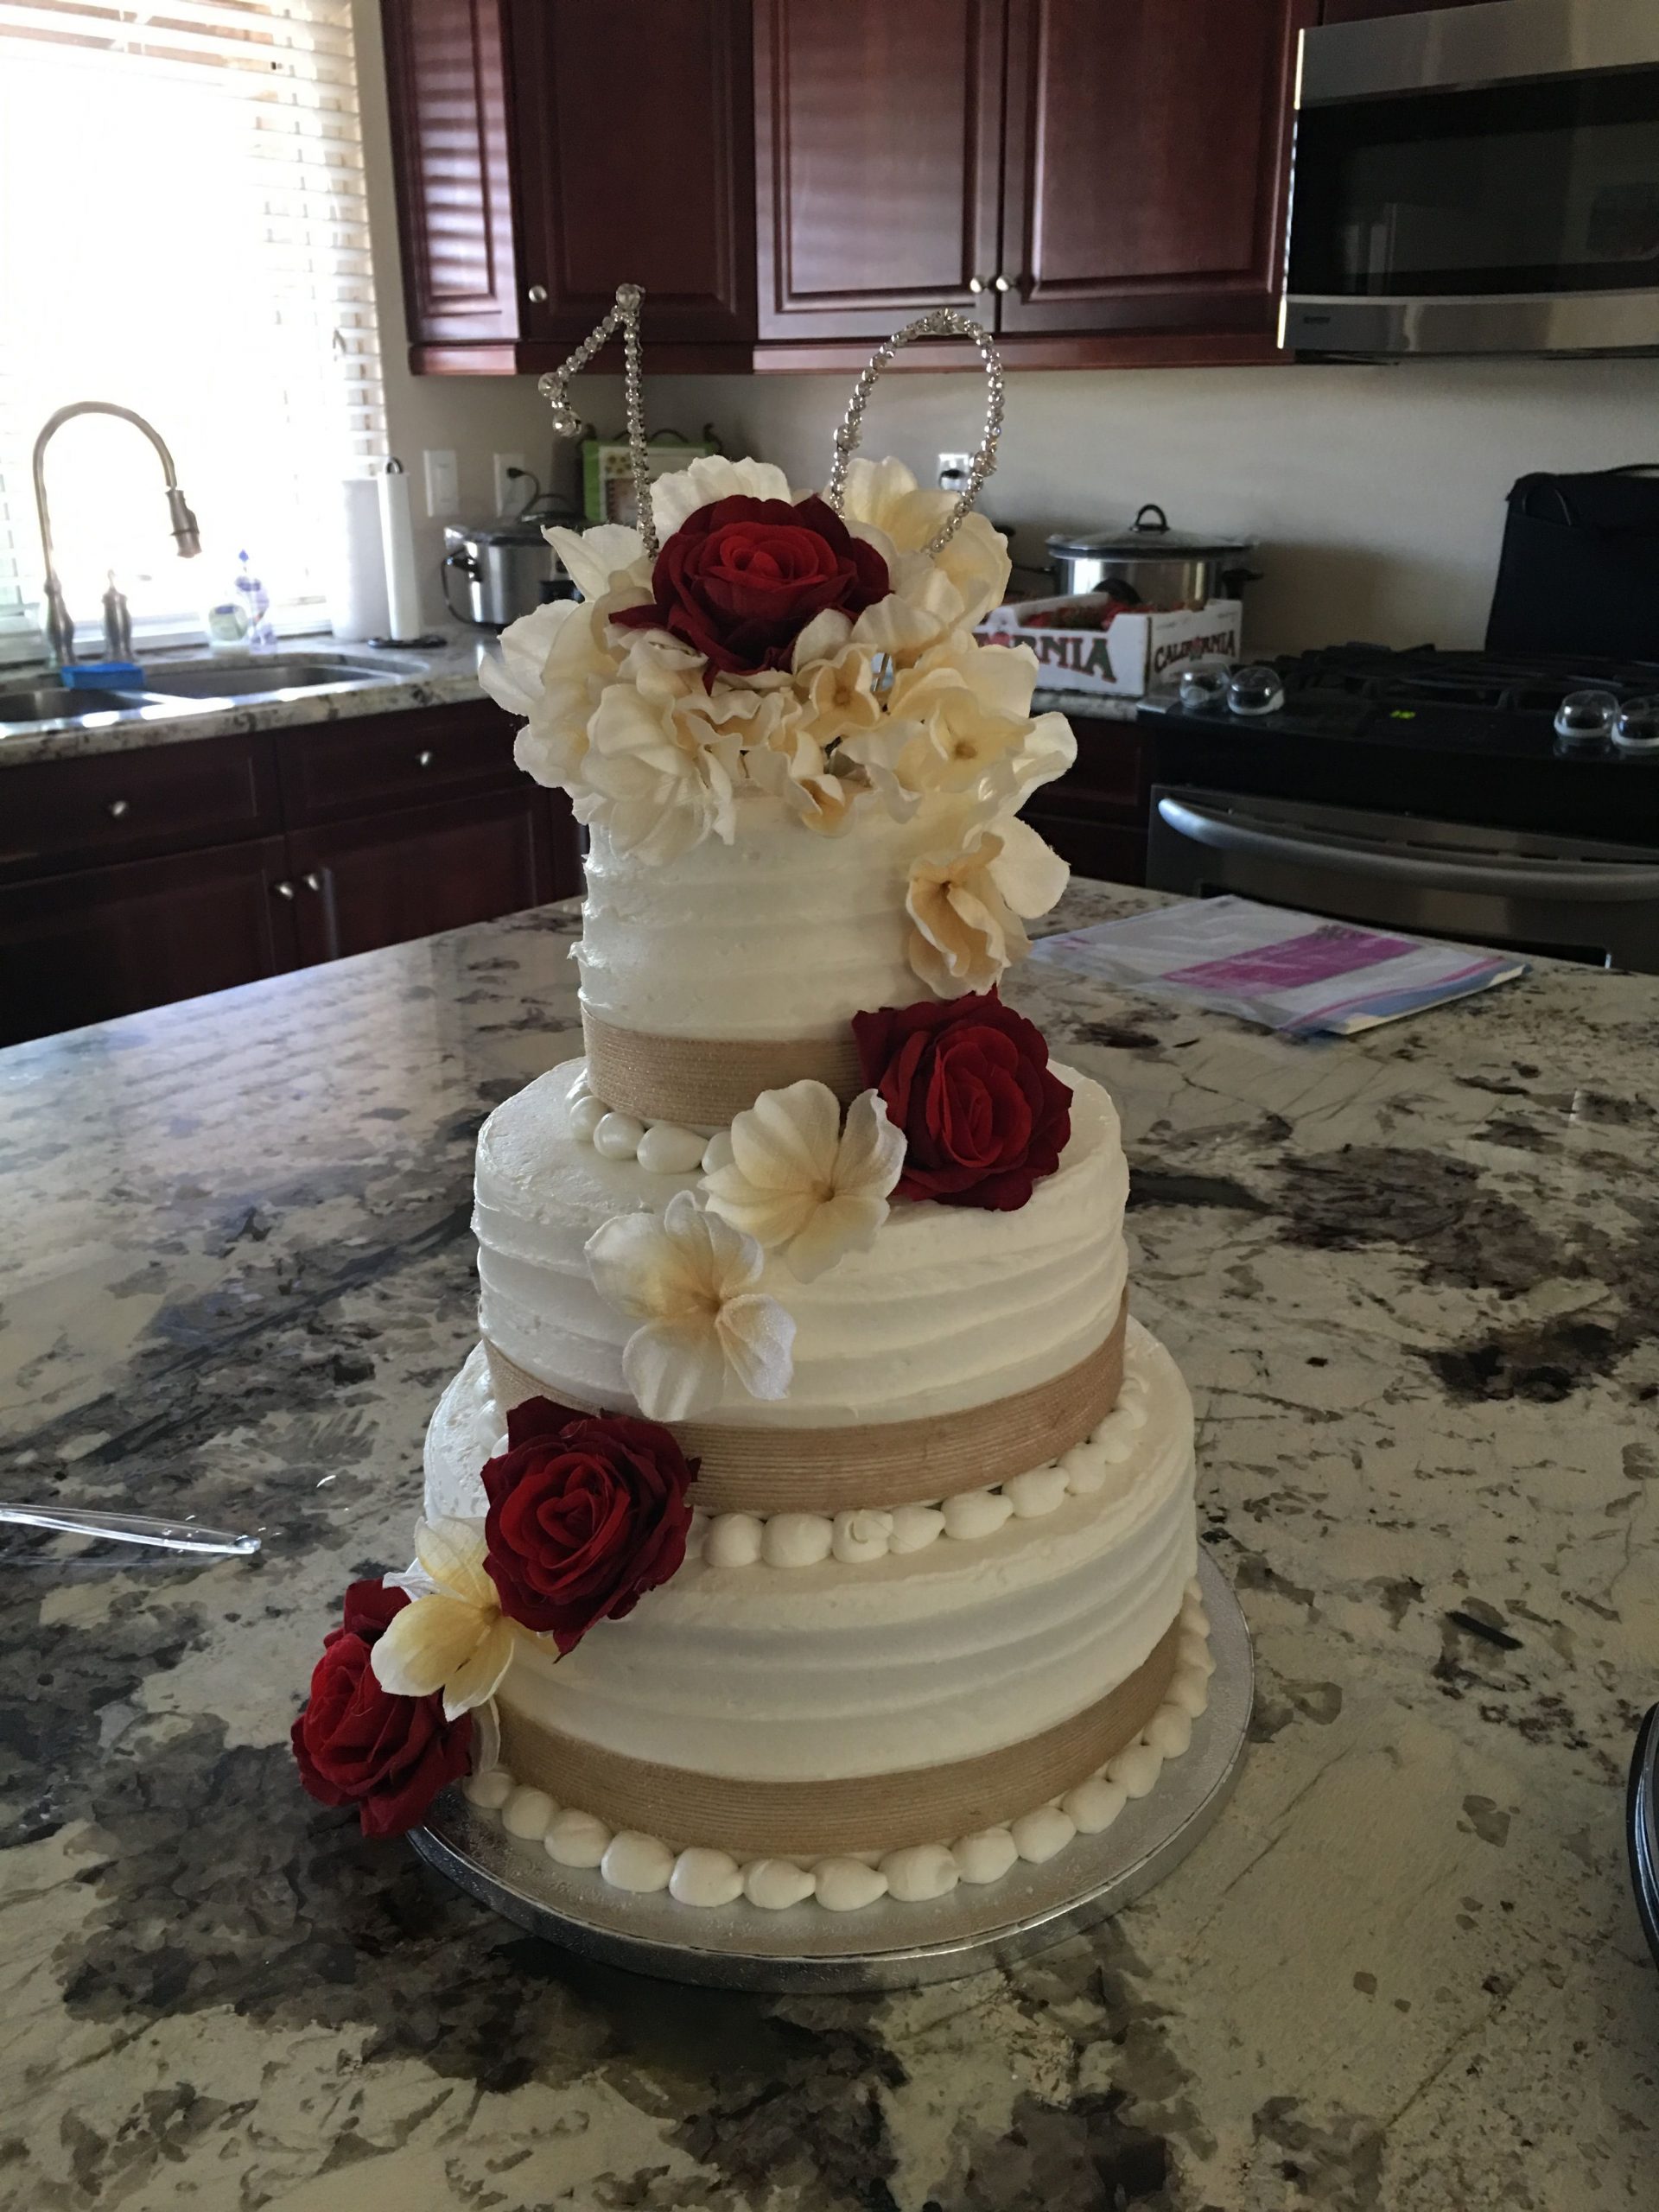 Rustic Country wedding cake. Go buy a three tier cake from Sam